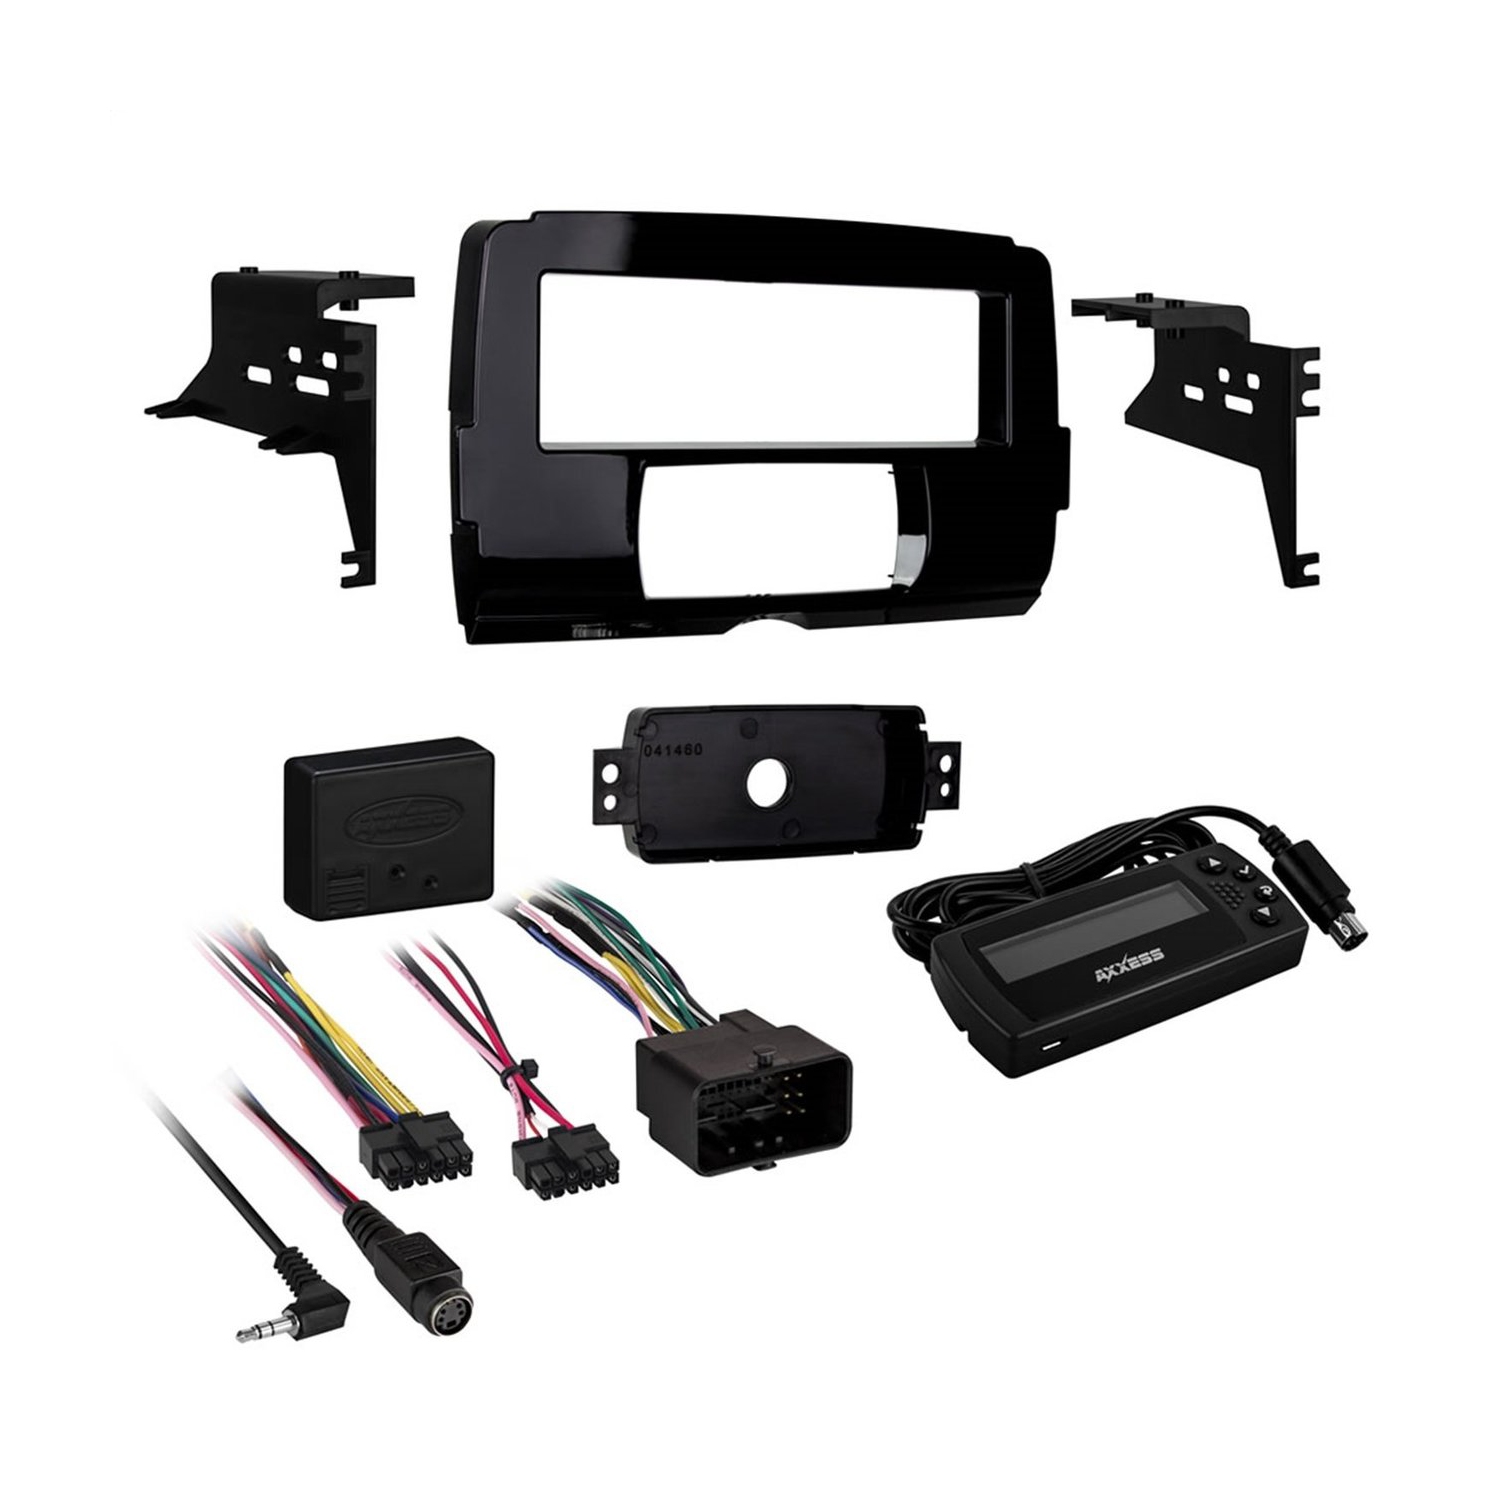 Metra 95-9700 Double DIN Dash Kit for Select 2014-Up Harley-Davidson Motorcycles